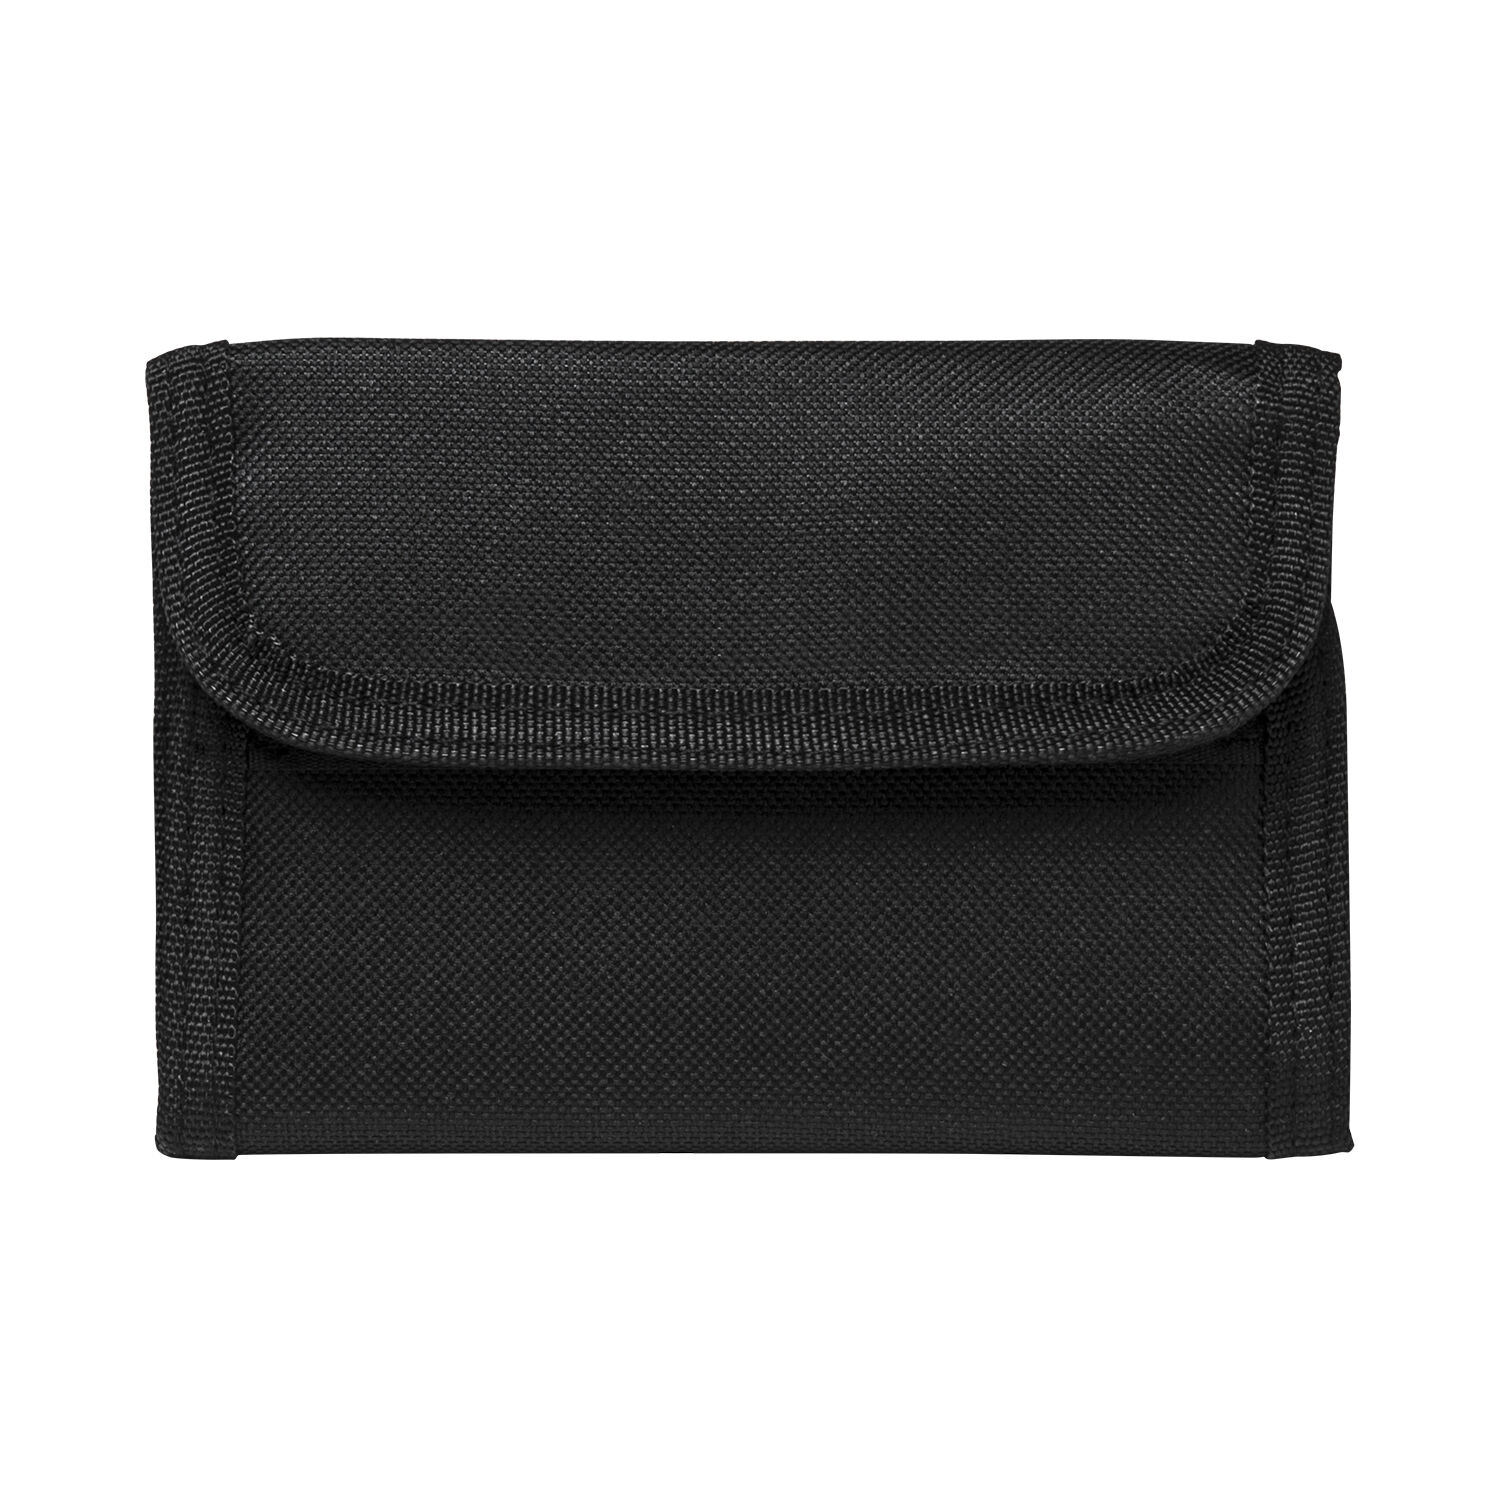 Black Law Enforcement Tactical Military Police Bifold Wallet